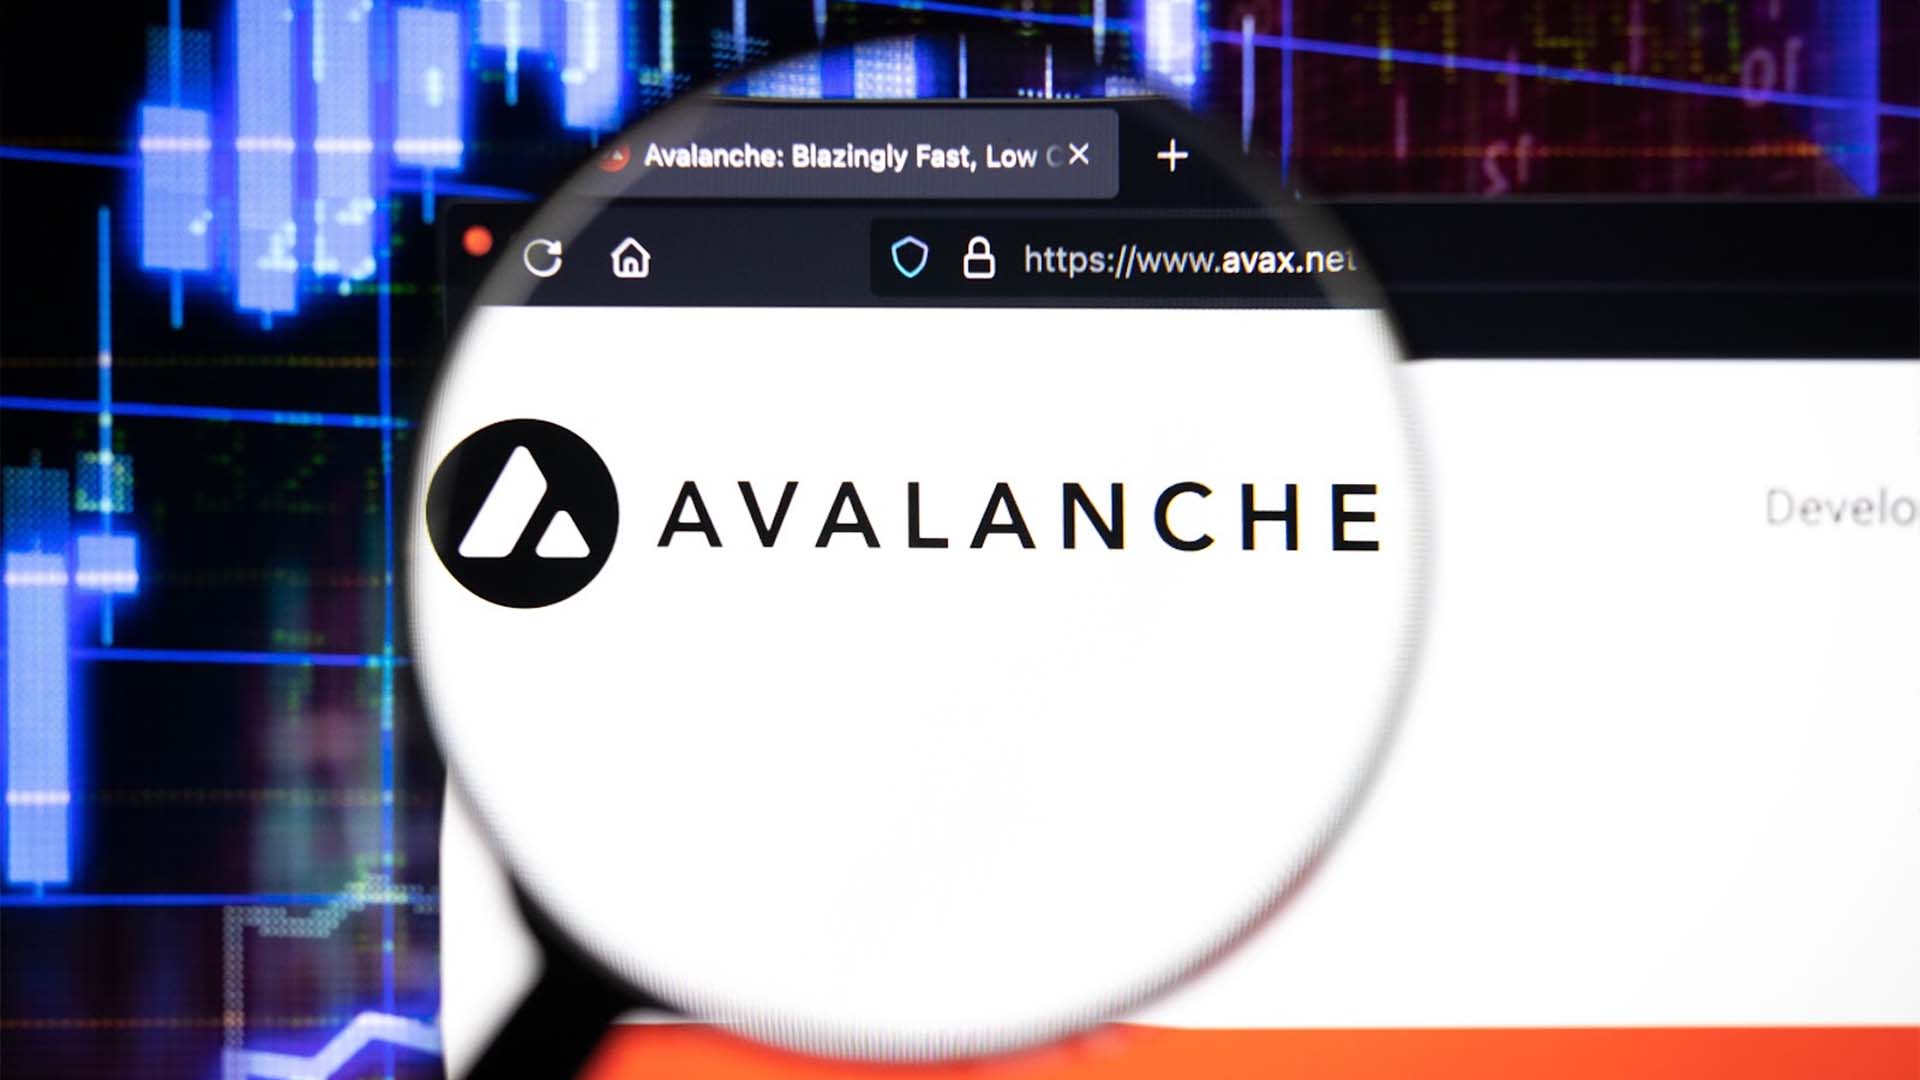 DigiToads Presale Earns Investor Trust as Avalanche faces market turbulence